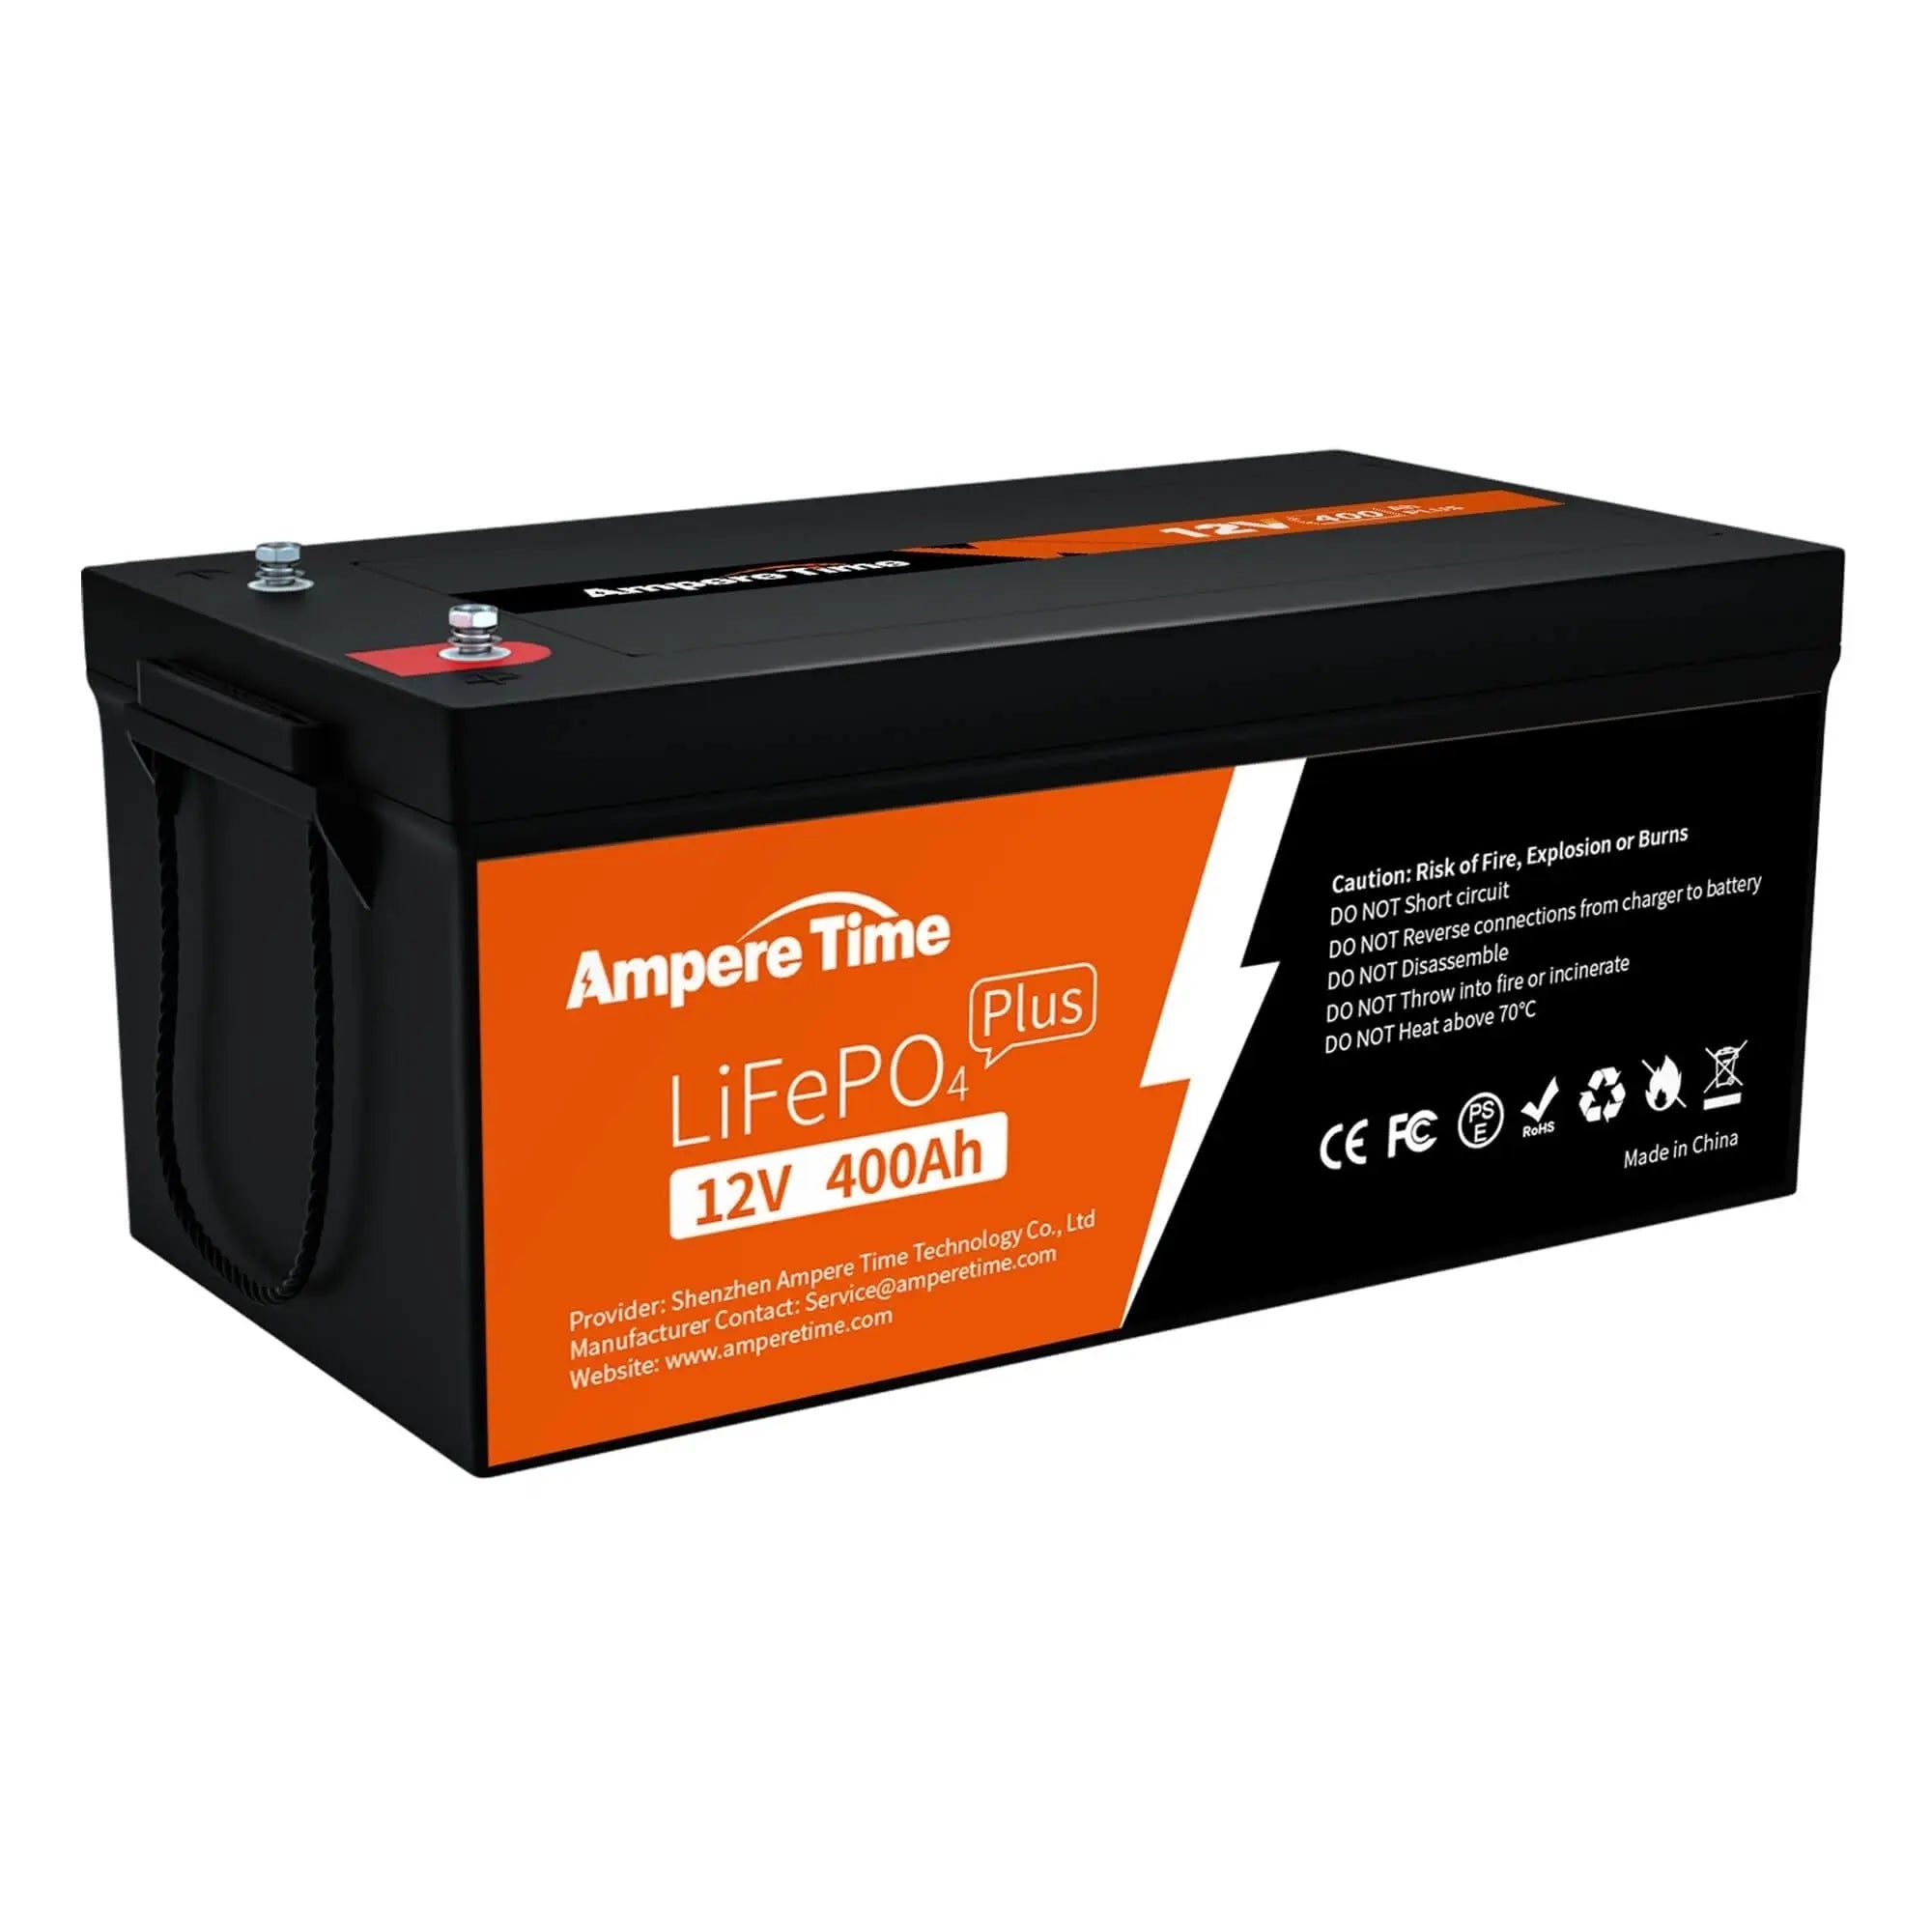 Ampere Time 12V 400Ah, 5120Wh Lithium LiFePO4 Battery & Built in 250A BMS Ampere Time